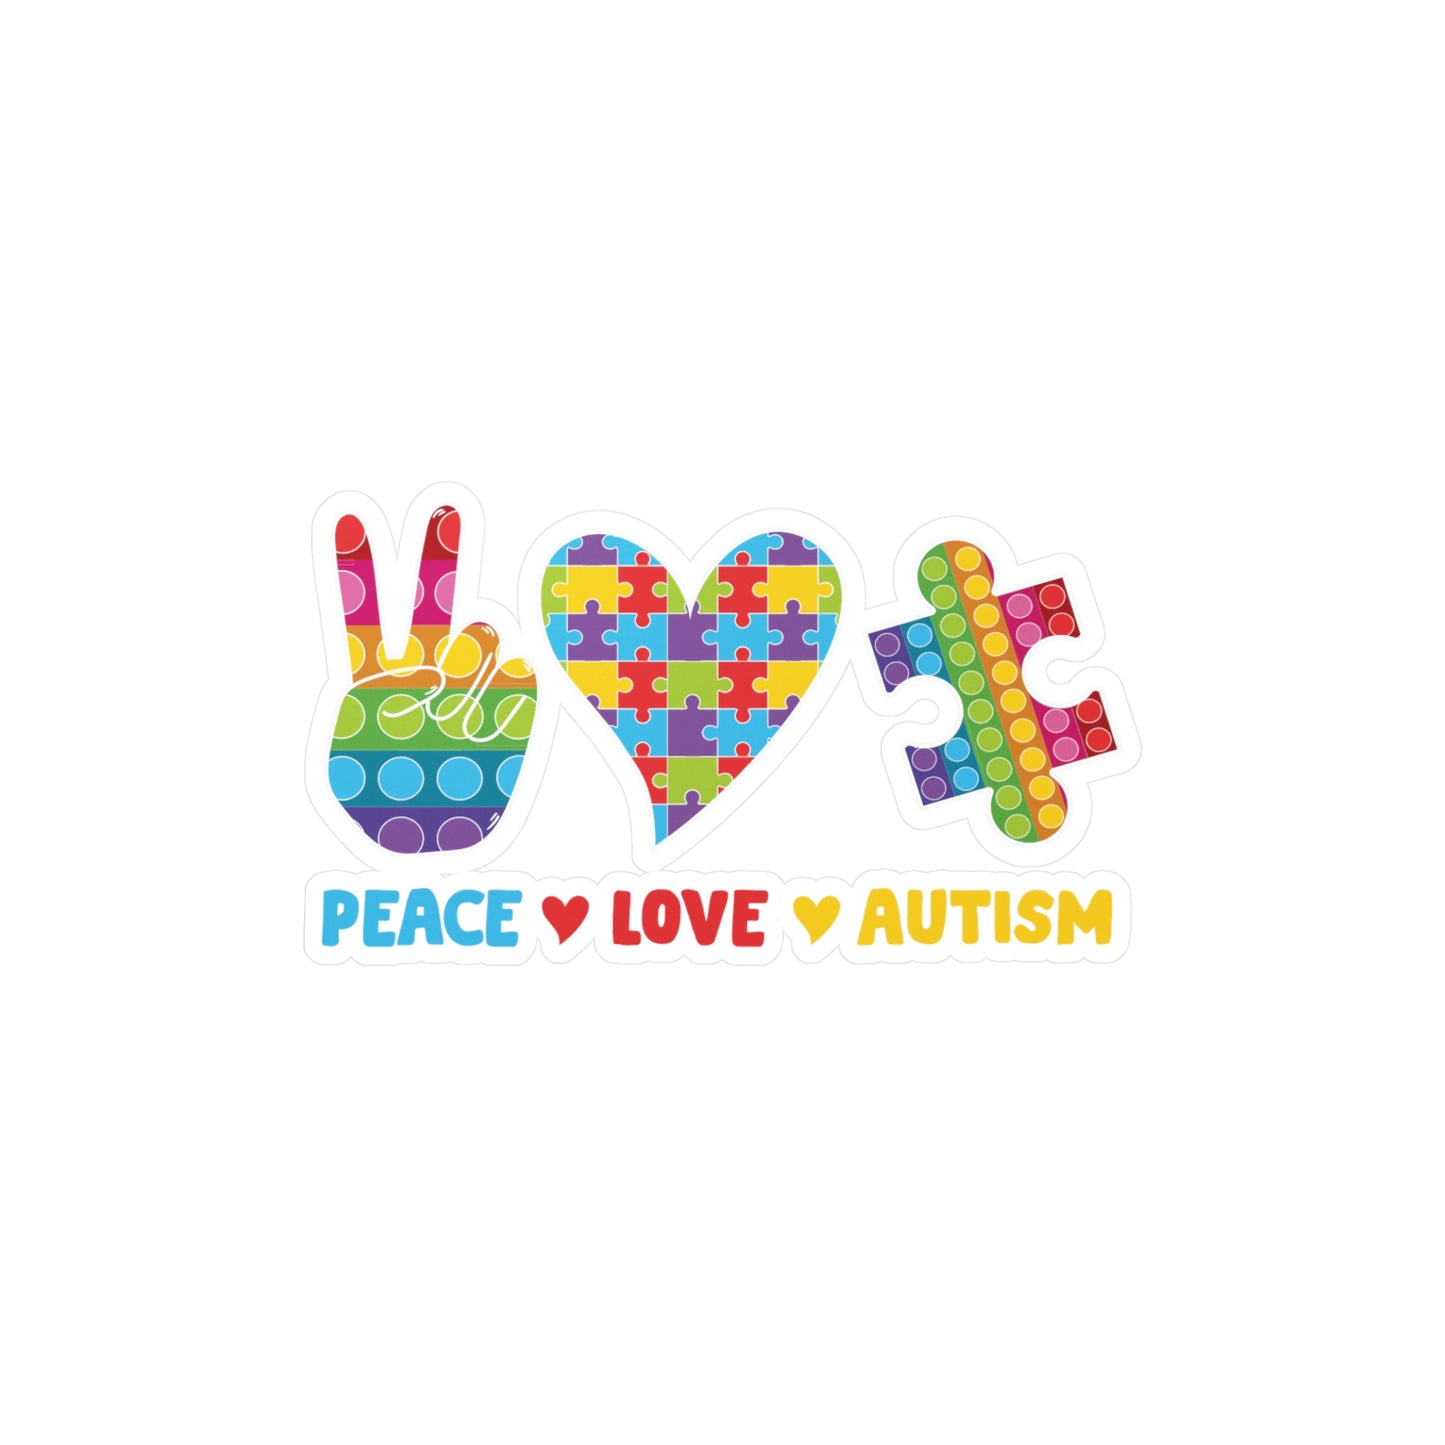 Peace Love Autism Vinyl Car Sticker Decal Sticker Christmas Gift Autism Support